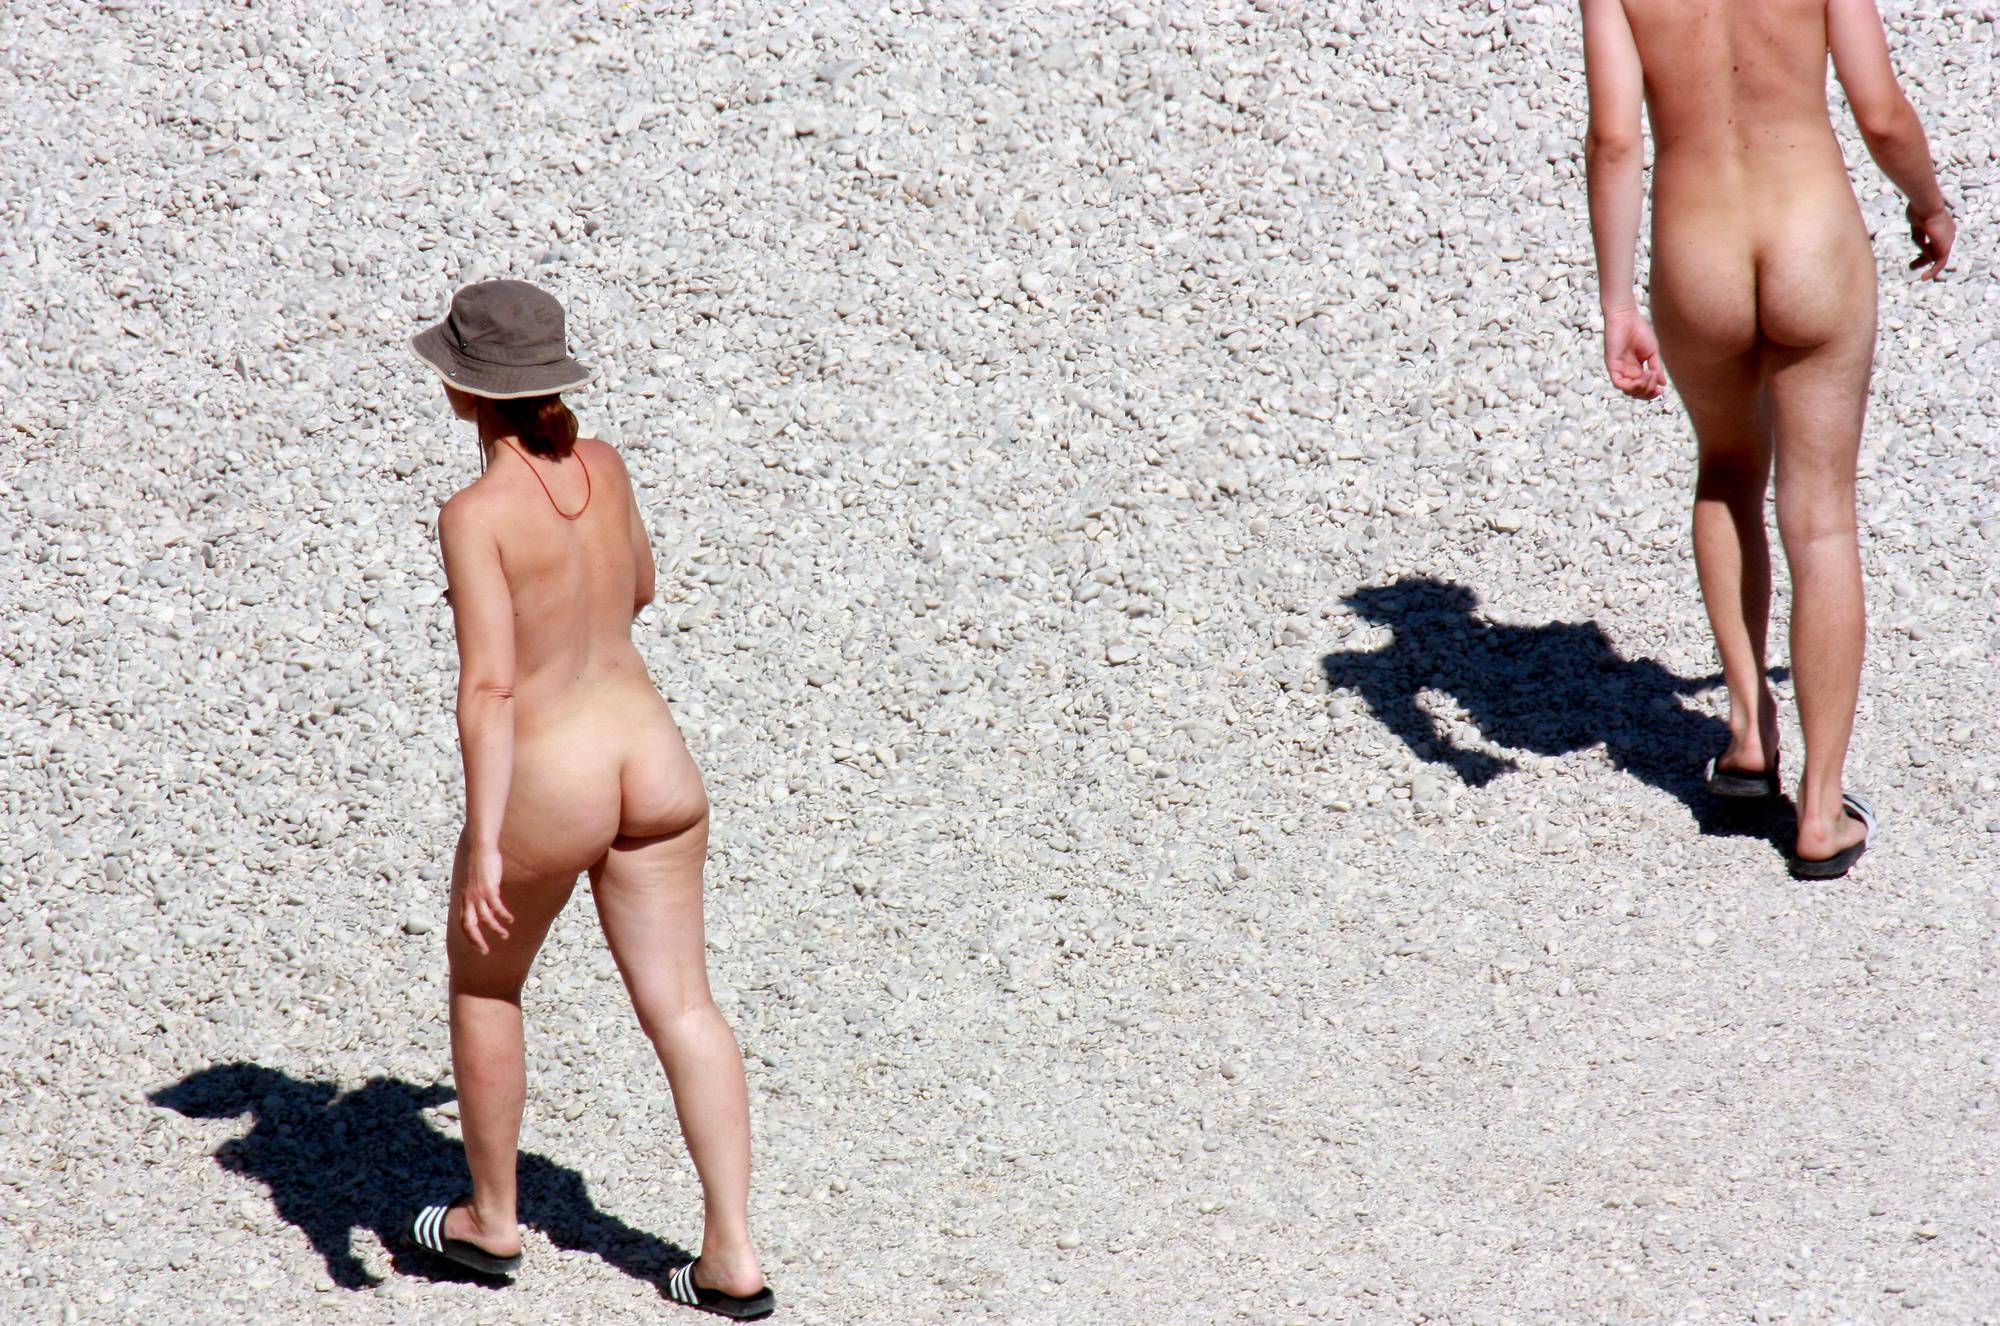 Nude and Topless Trio Walk - 1